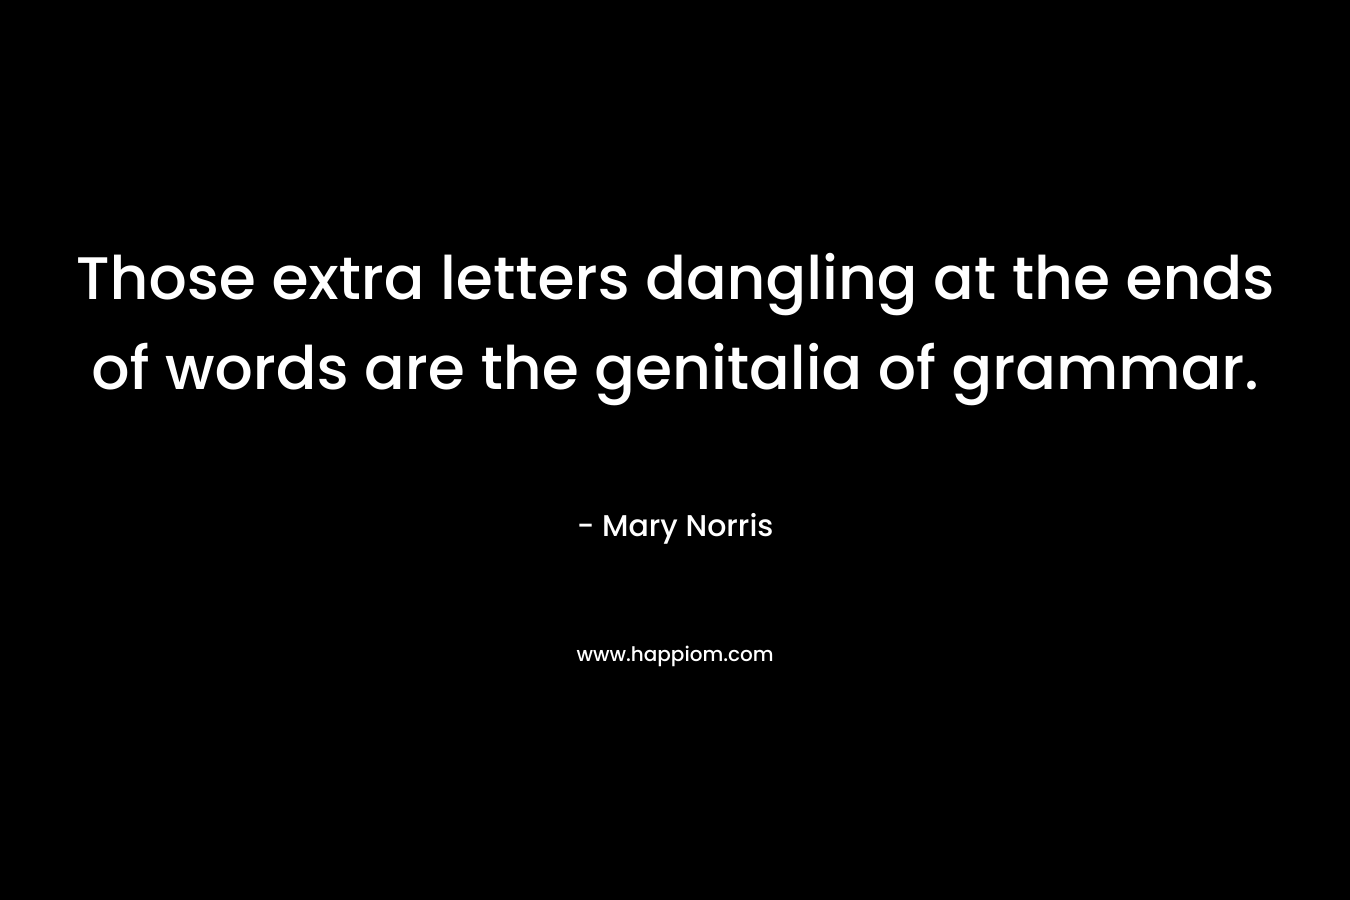 Those extra letters dangling at the ends of words are the genitalia of grammar. – Mary Norris